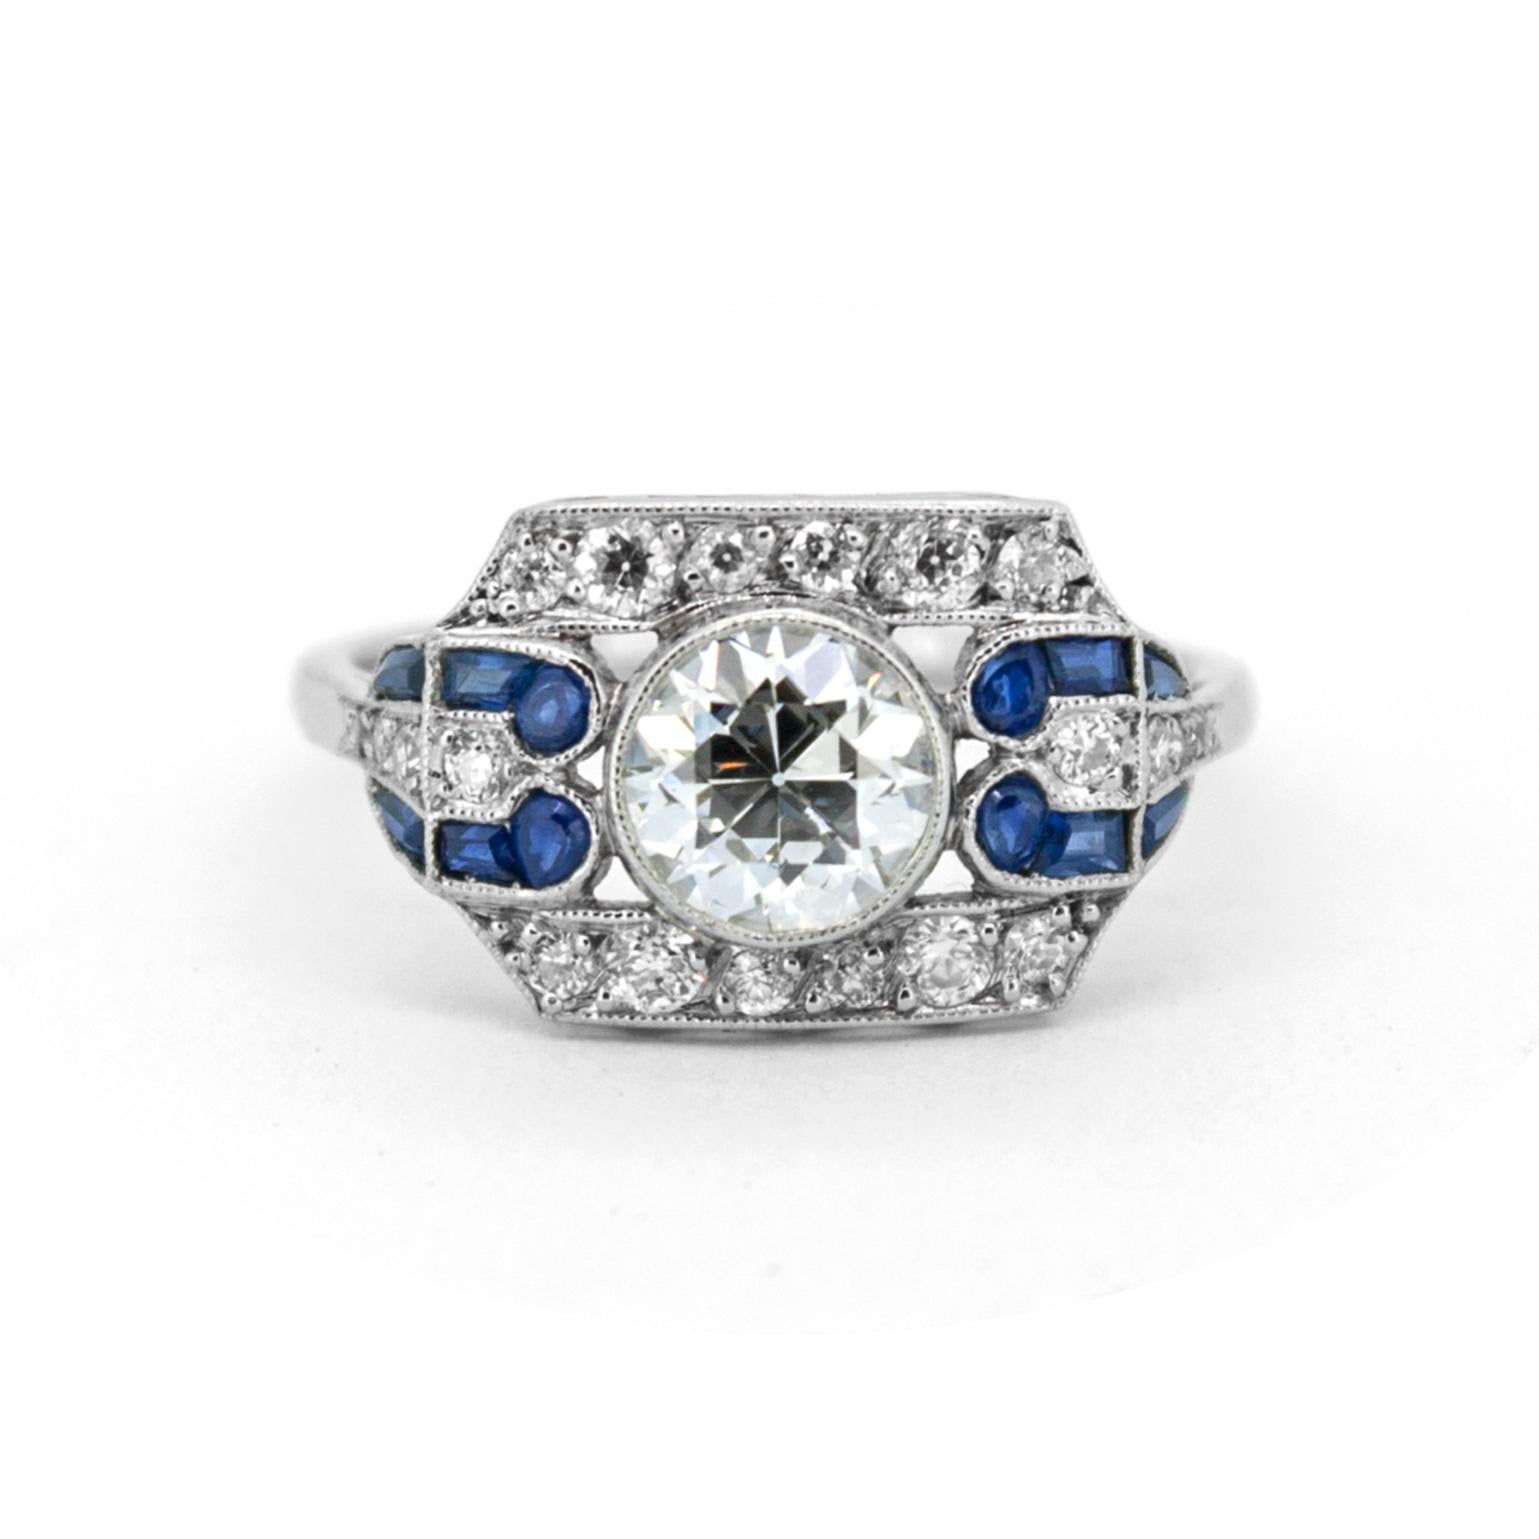 Rarely do we find an original Art Deco ring with the quality and detail exhibited in Henrietta; from the exceptional transitional cut diamond, aglow with fire and brilliance, to the vibrant sapphires, which were precision cut just for this